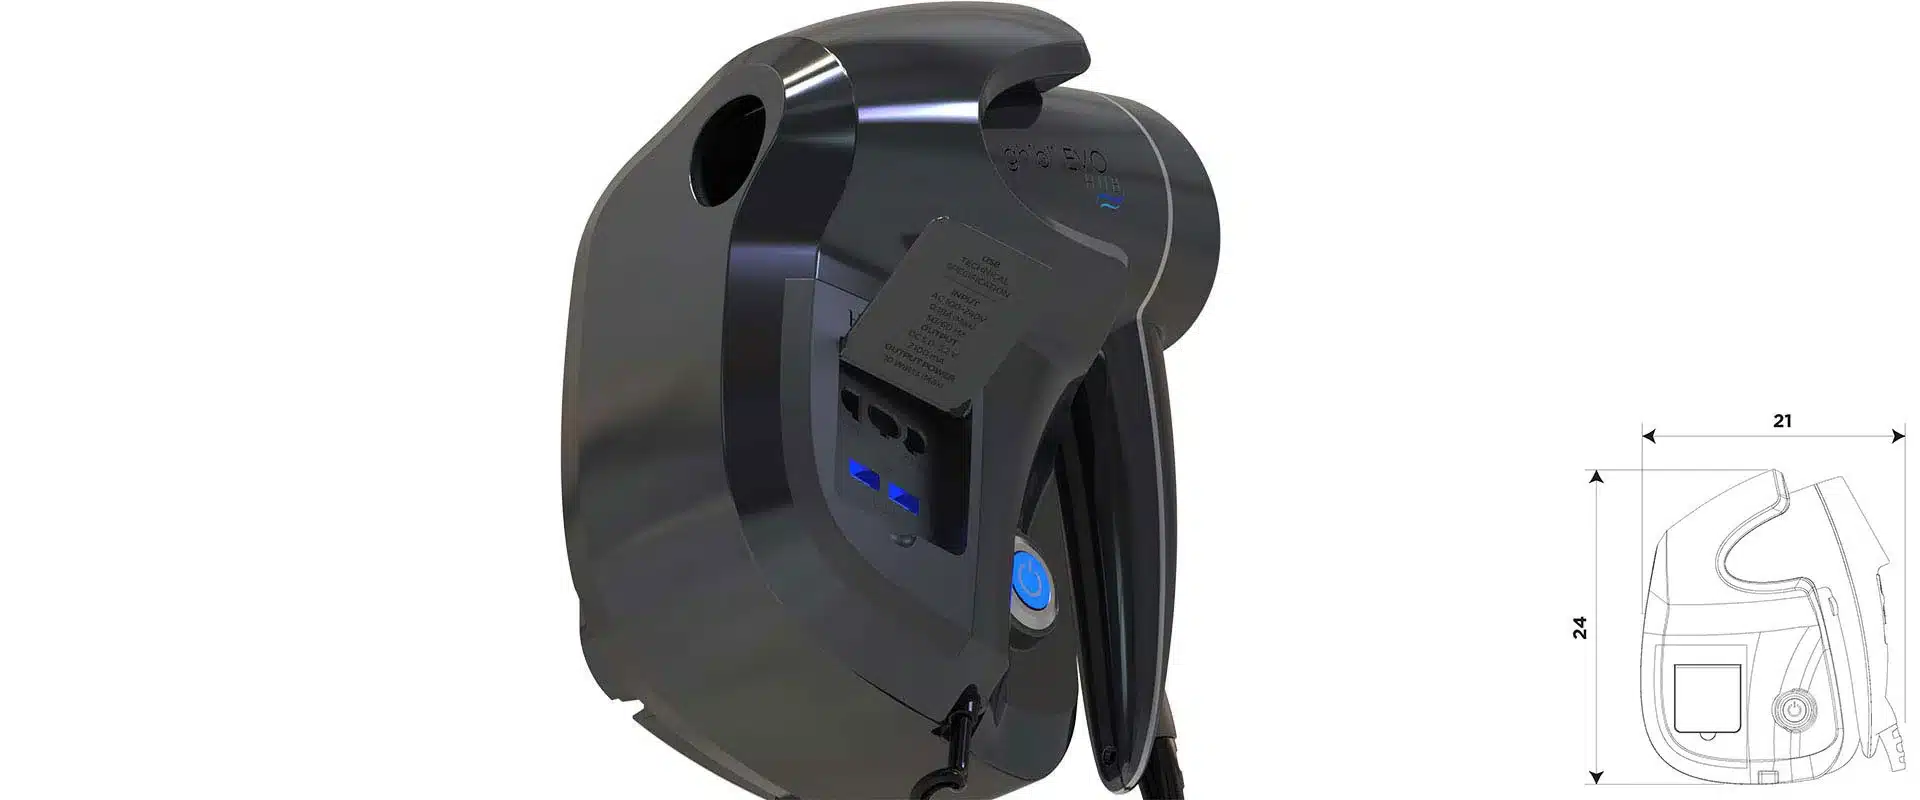 hair dryer with two usb sockets and led light